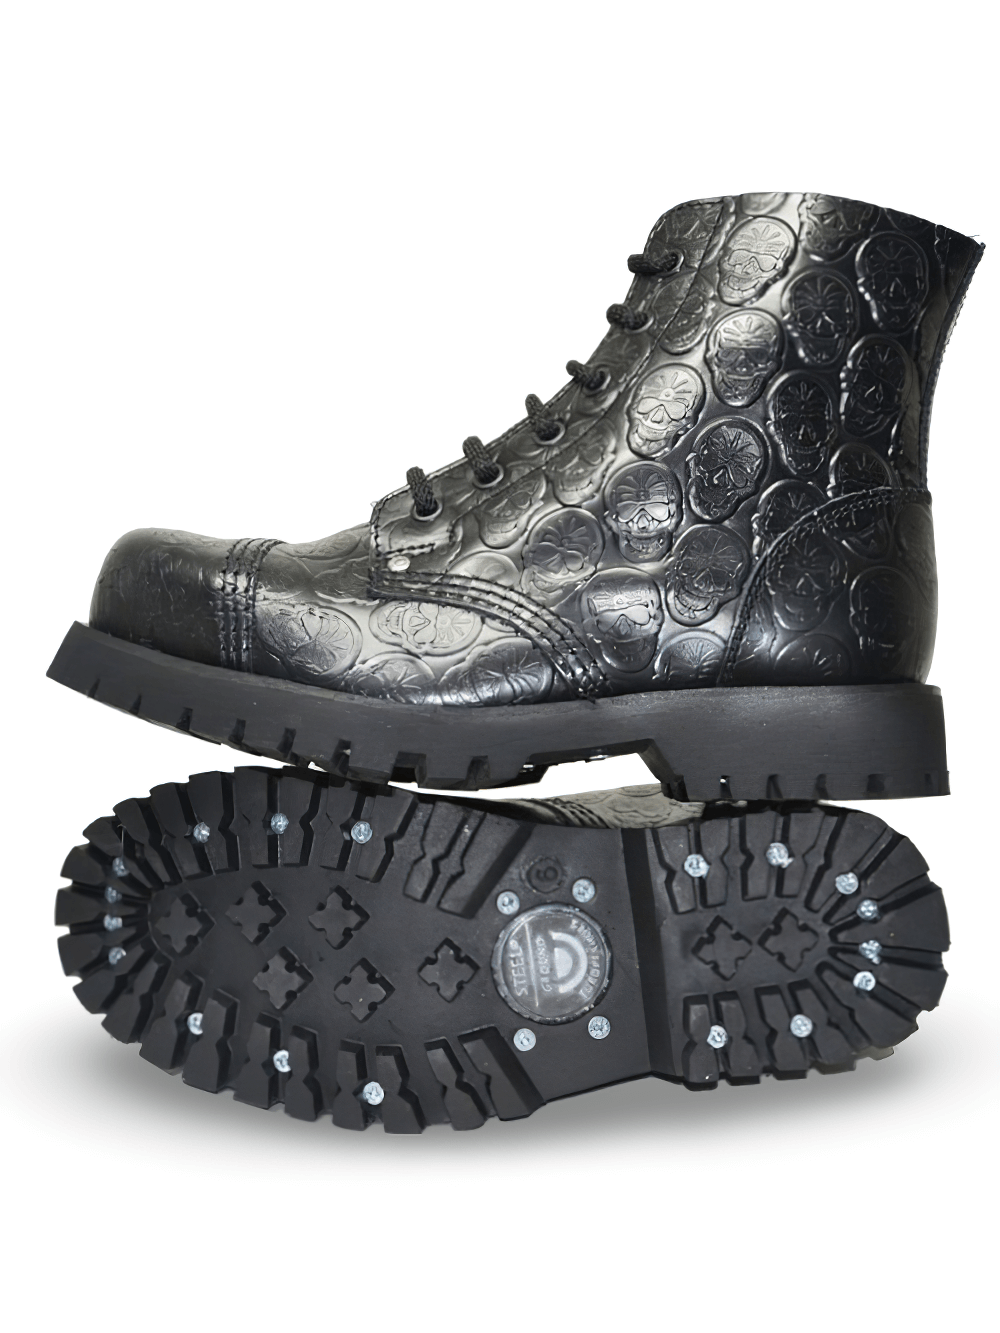 Chic Gothic 6-Eyelet Leather Ranger Boots with Round Toe